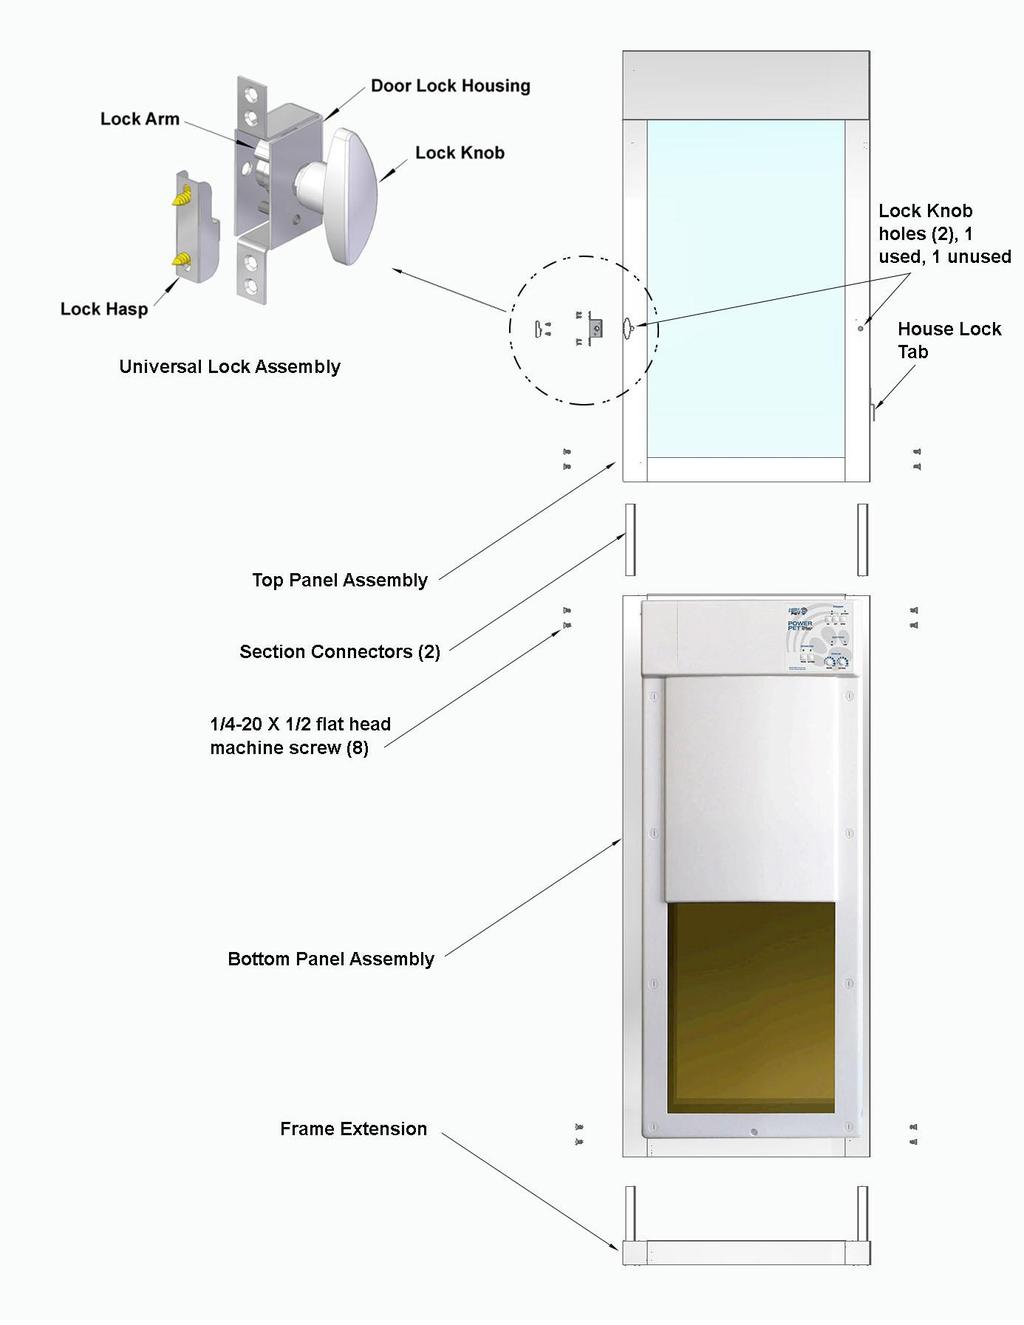 Basic Door Assembly May be placed on left or right